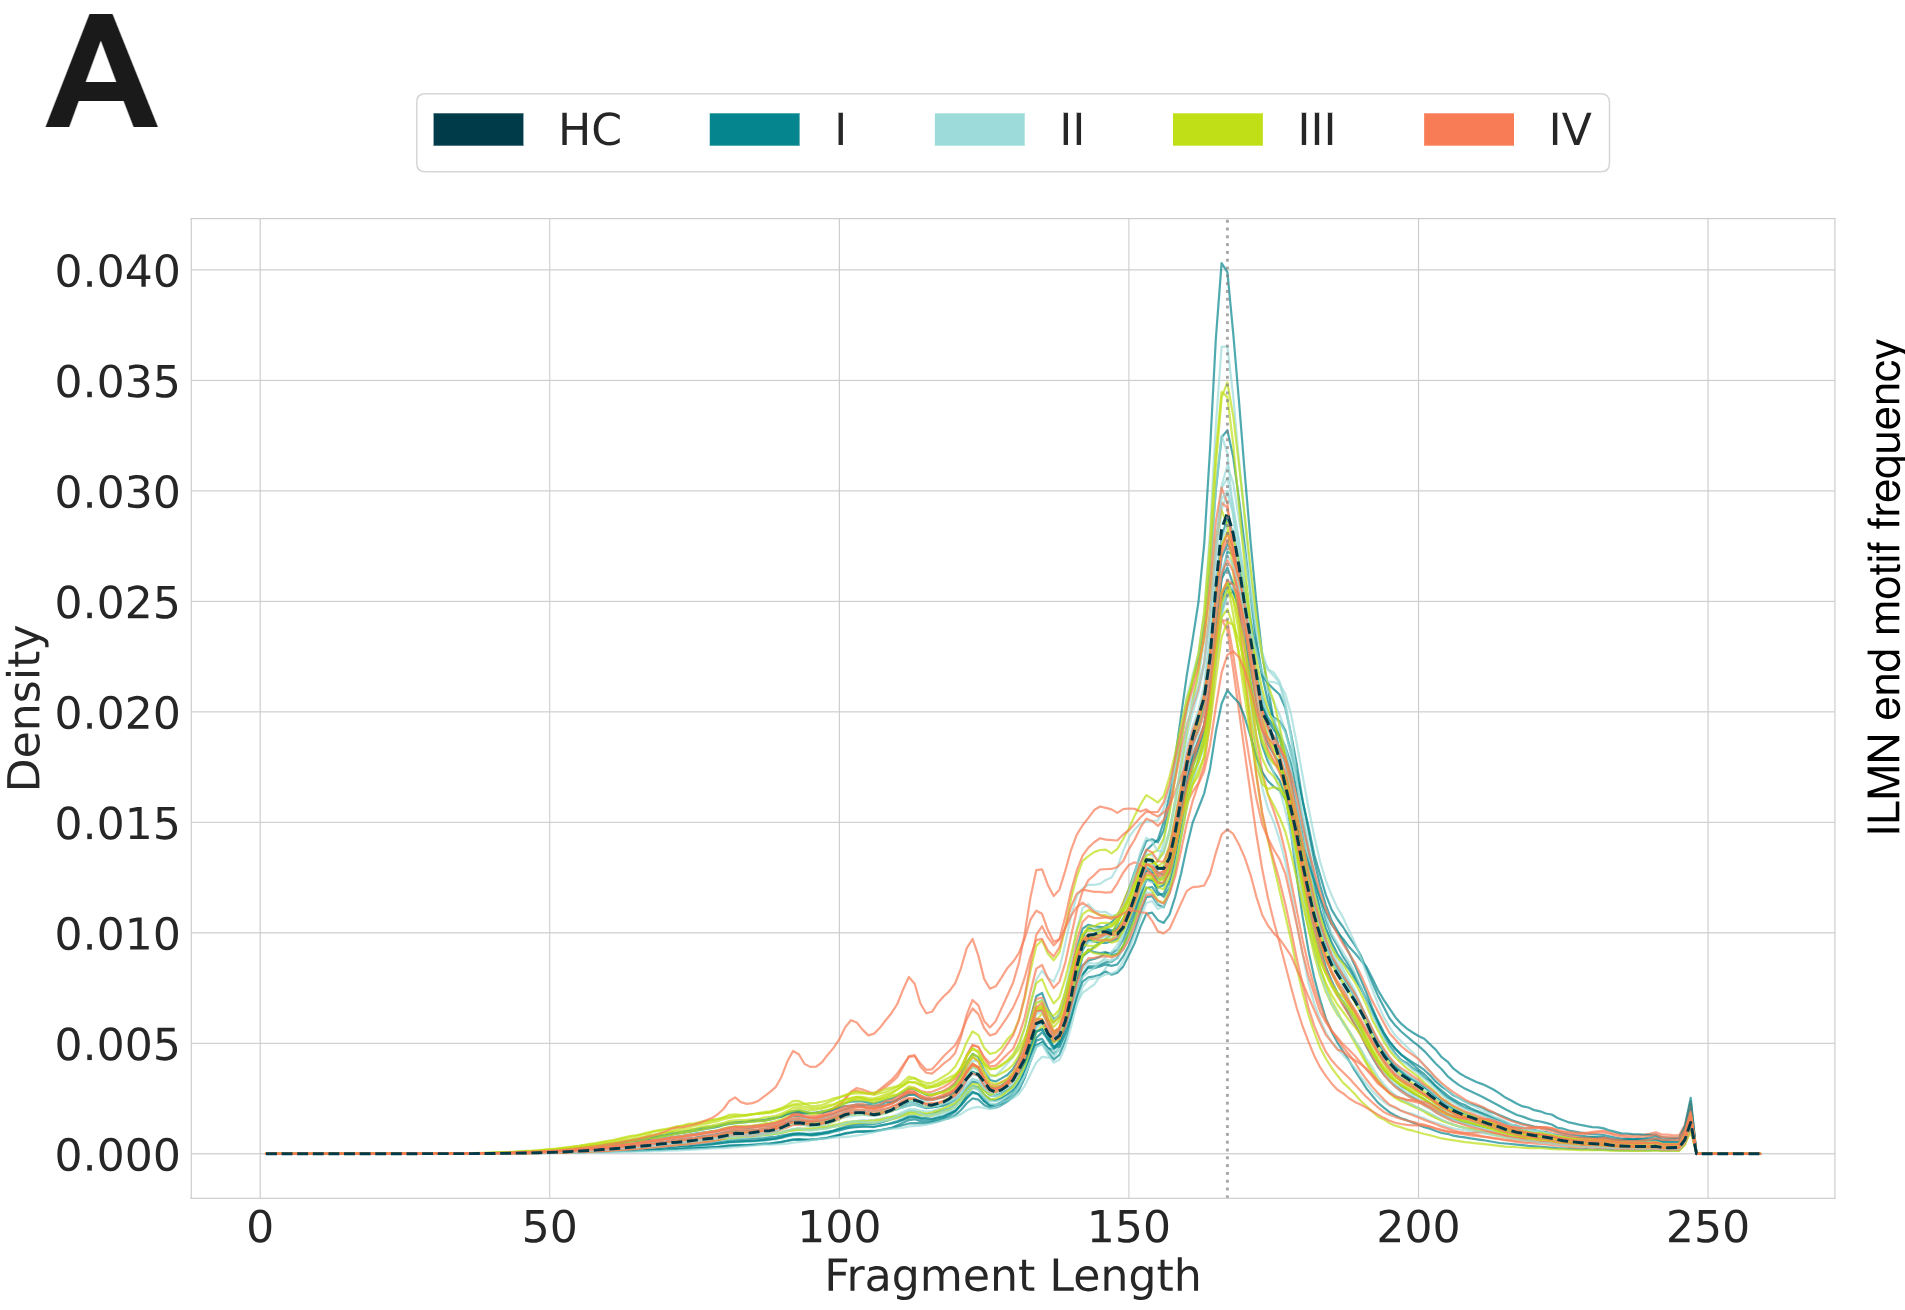 Fragment length profiles for healthy and stage I-IV CRC cfDNA samples generated using duet evoC